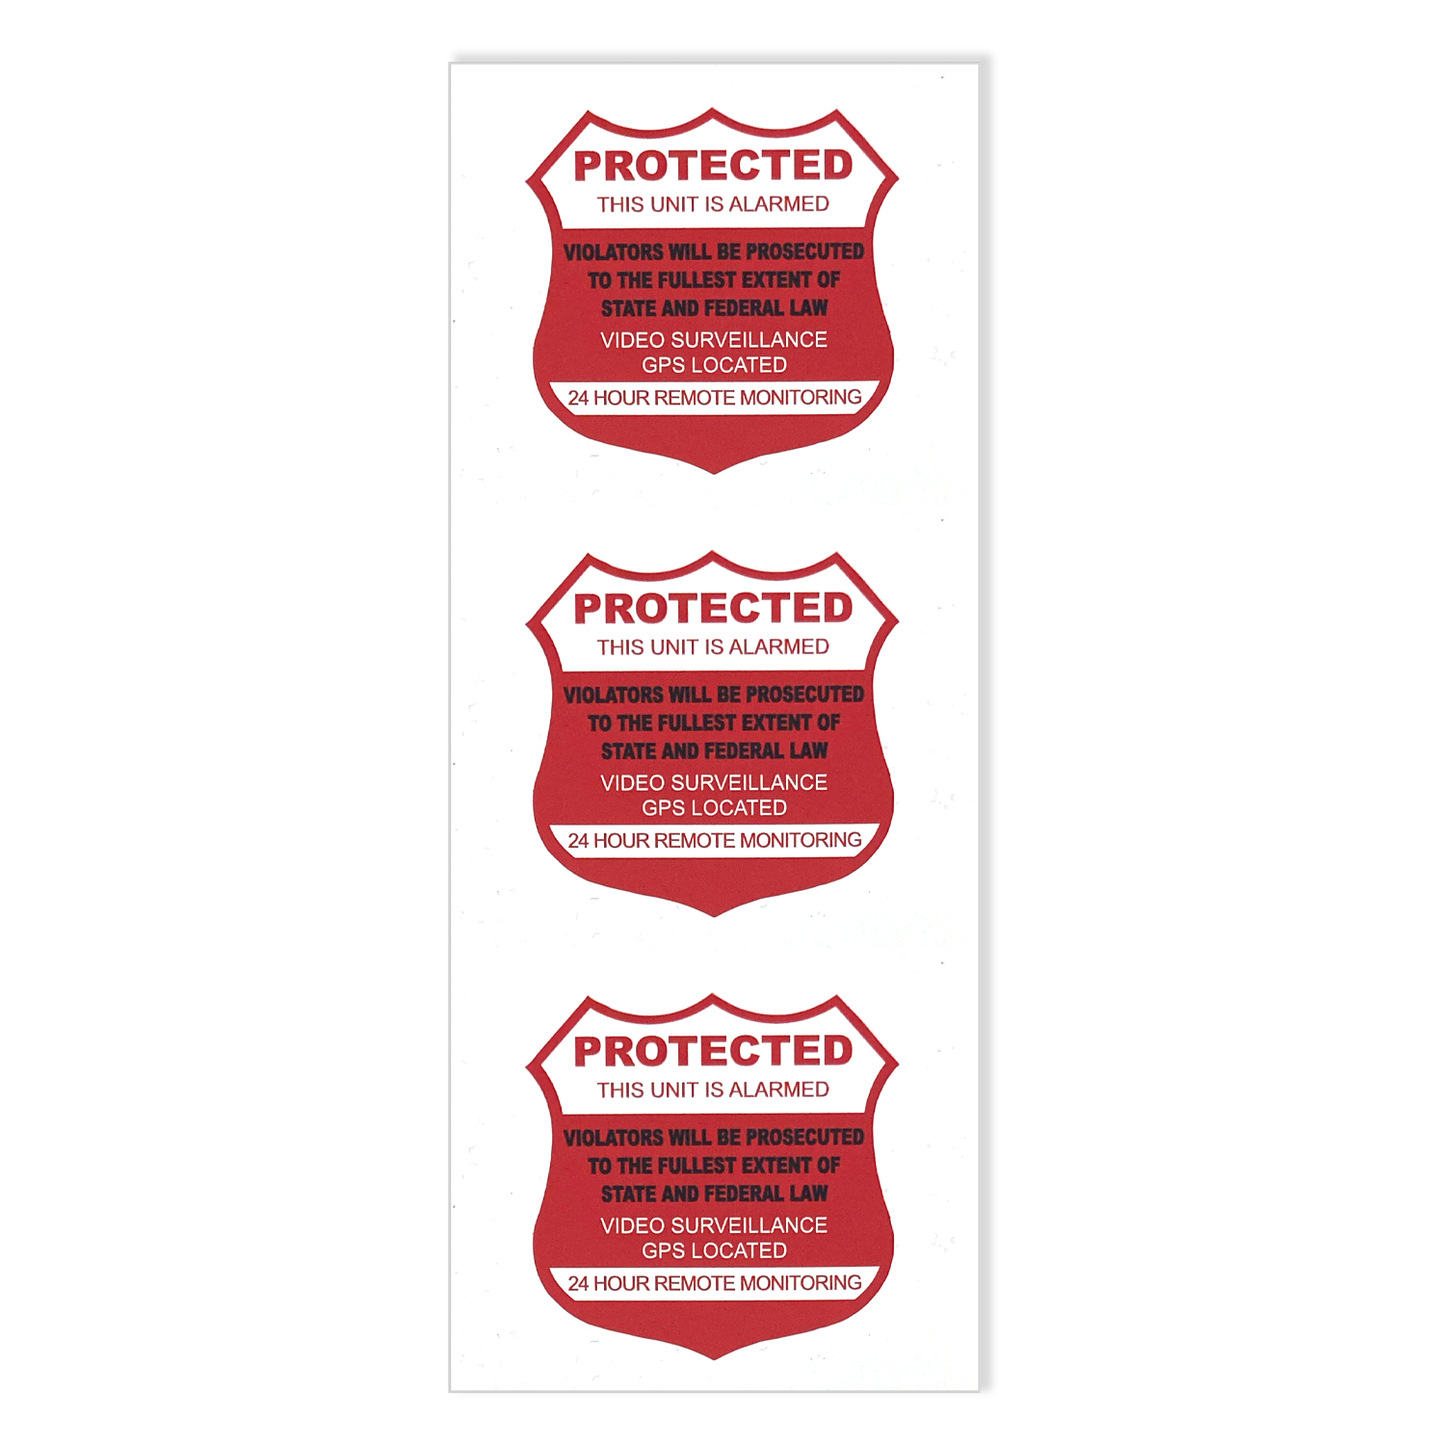 Show that your business is secure with a Security Decal. Single sided decal that says "Protected; Game terminals alarmed at this location; Video surveillance; GPS located; 24 Hour Monitoring." Sold by Miele Manufacturing.